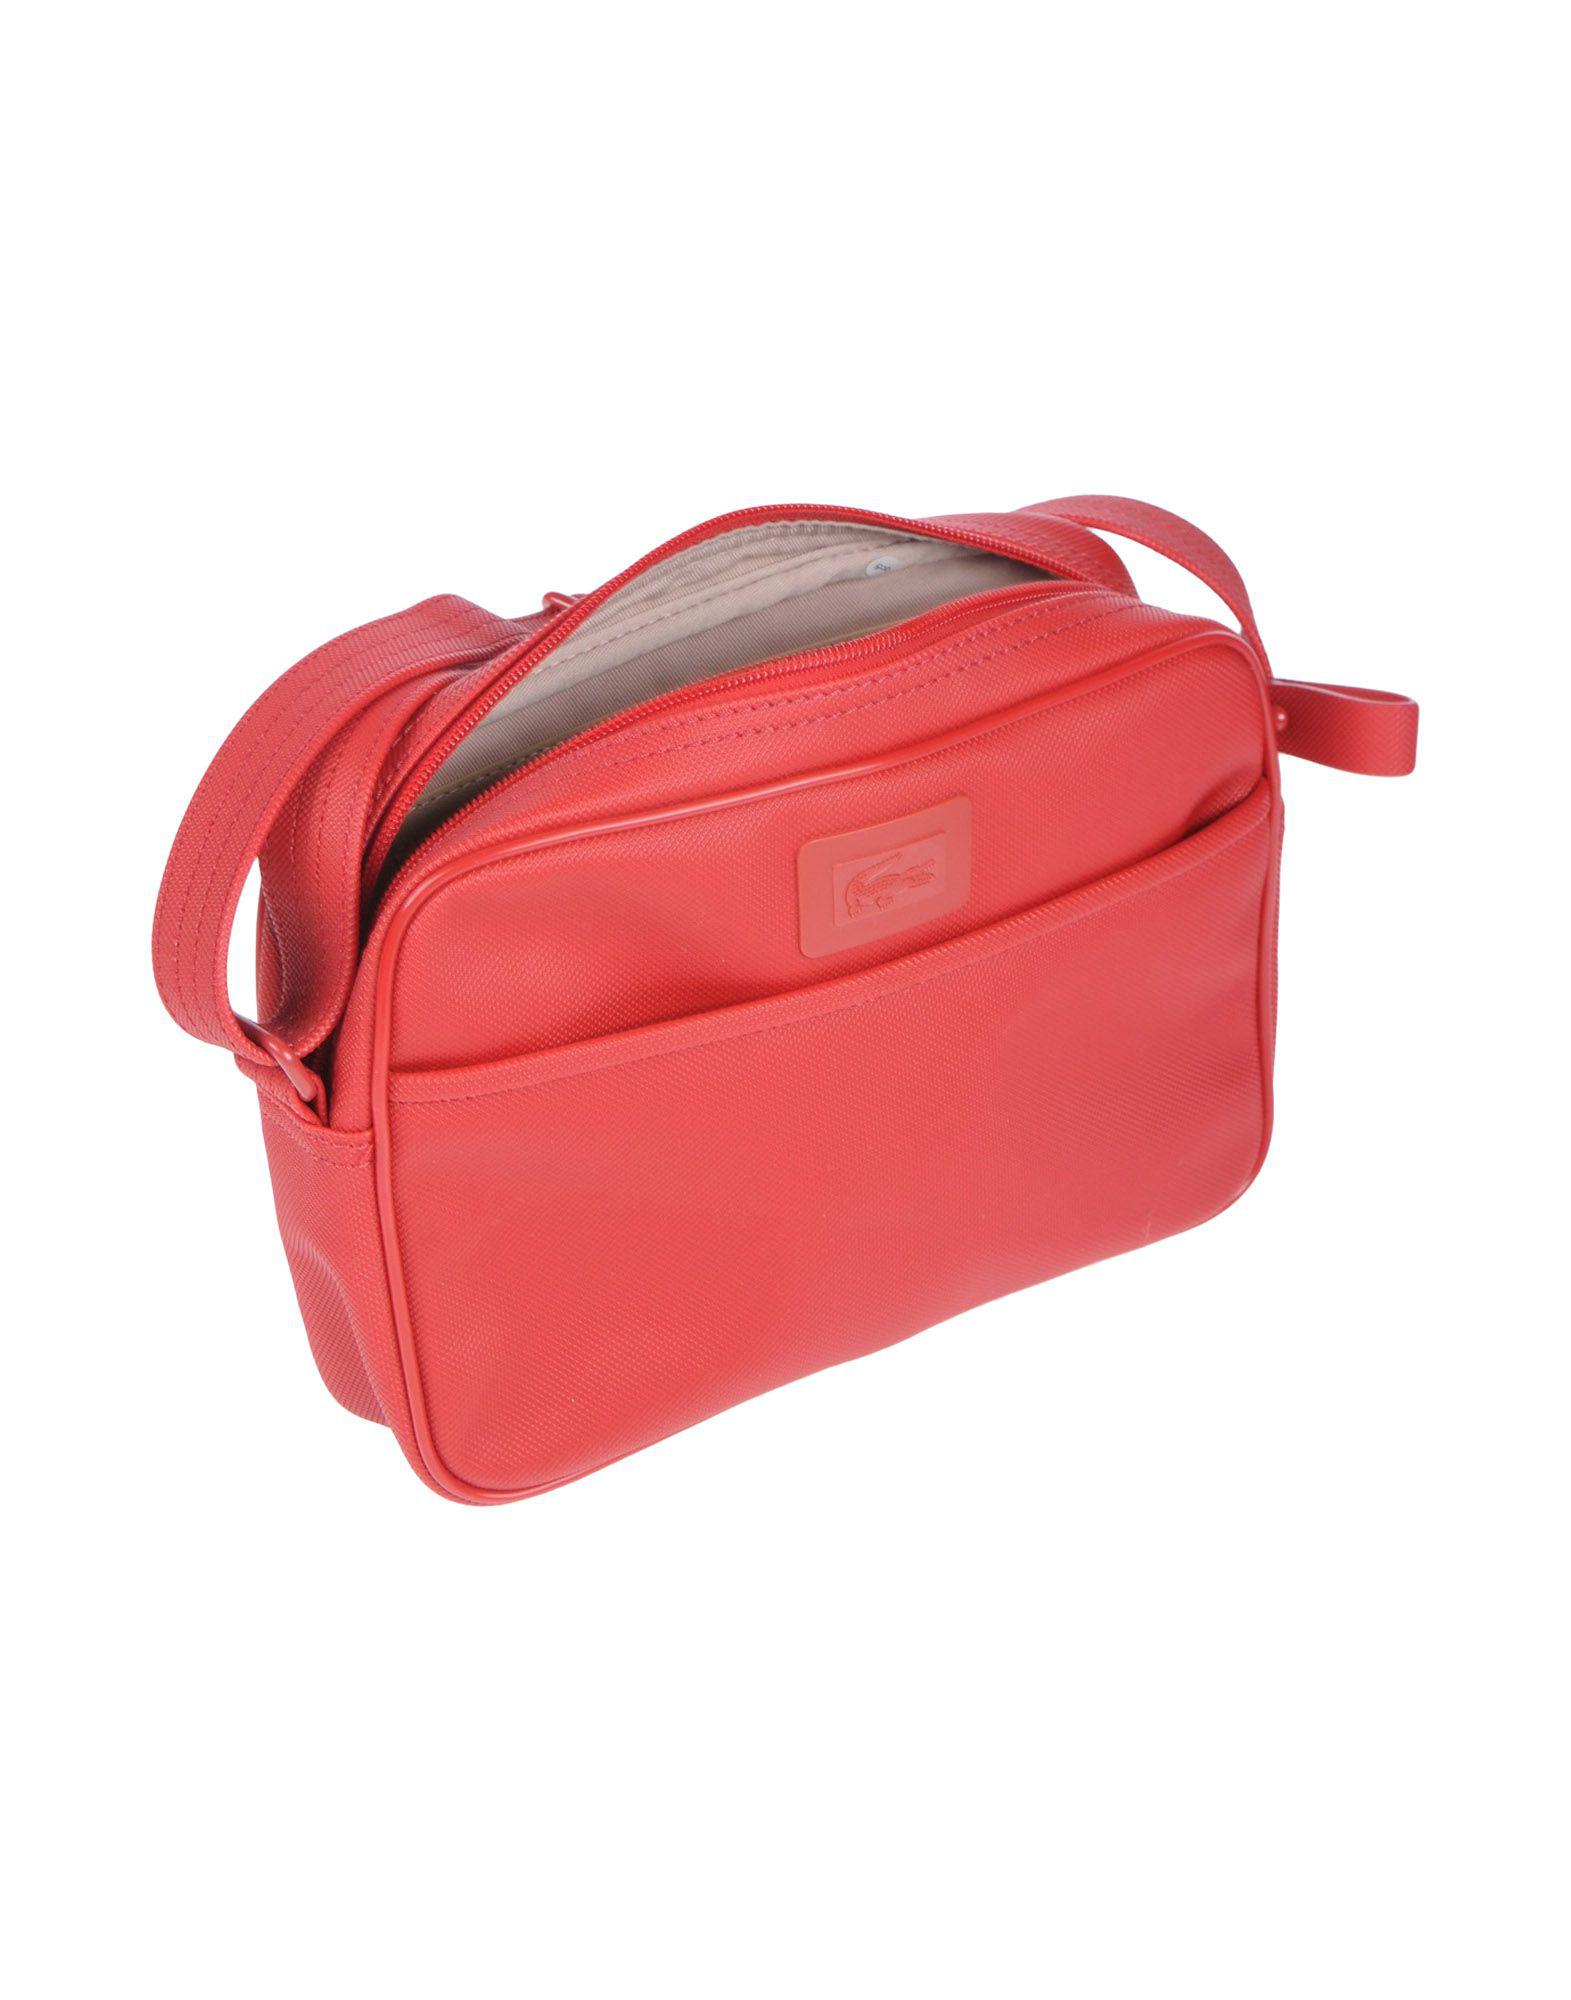 lacoste red crossbody bag